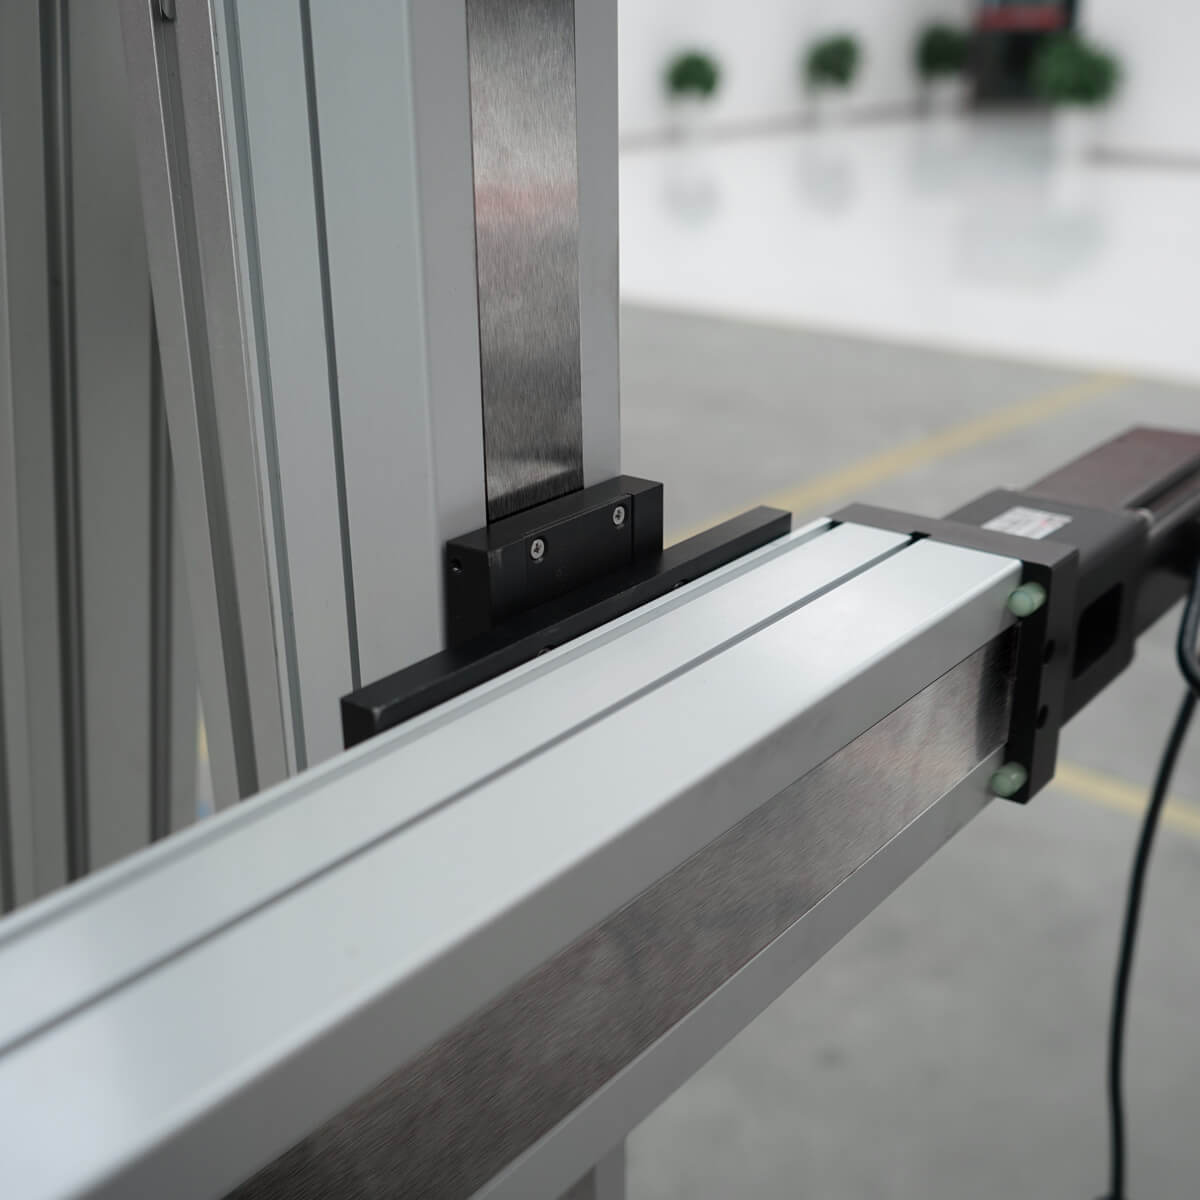 Case Study Dual Z Axis Linear Positioning System Customized Stroke Gantry Robot Dustproof Rail Guide